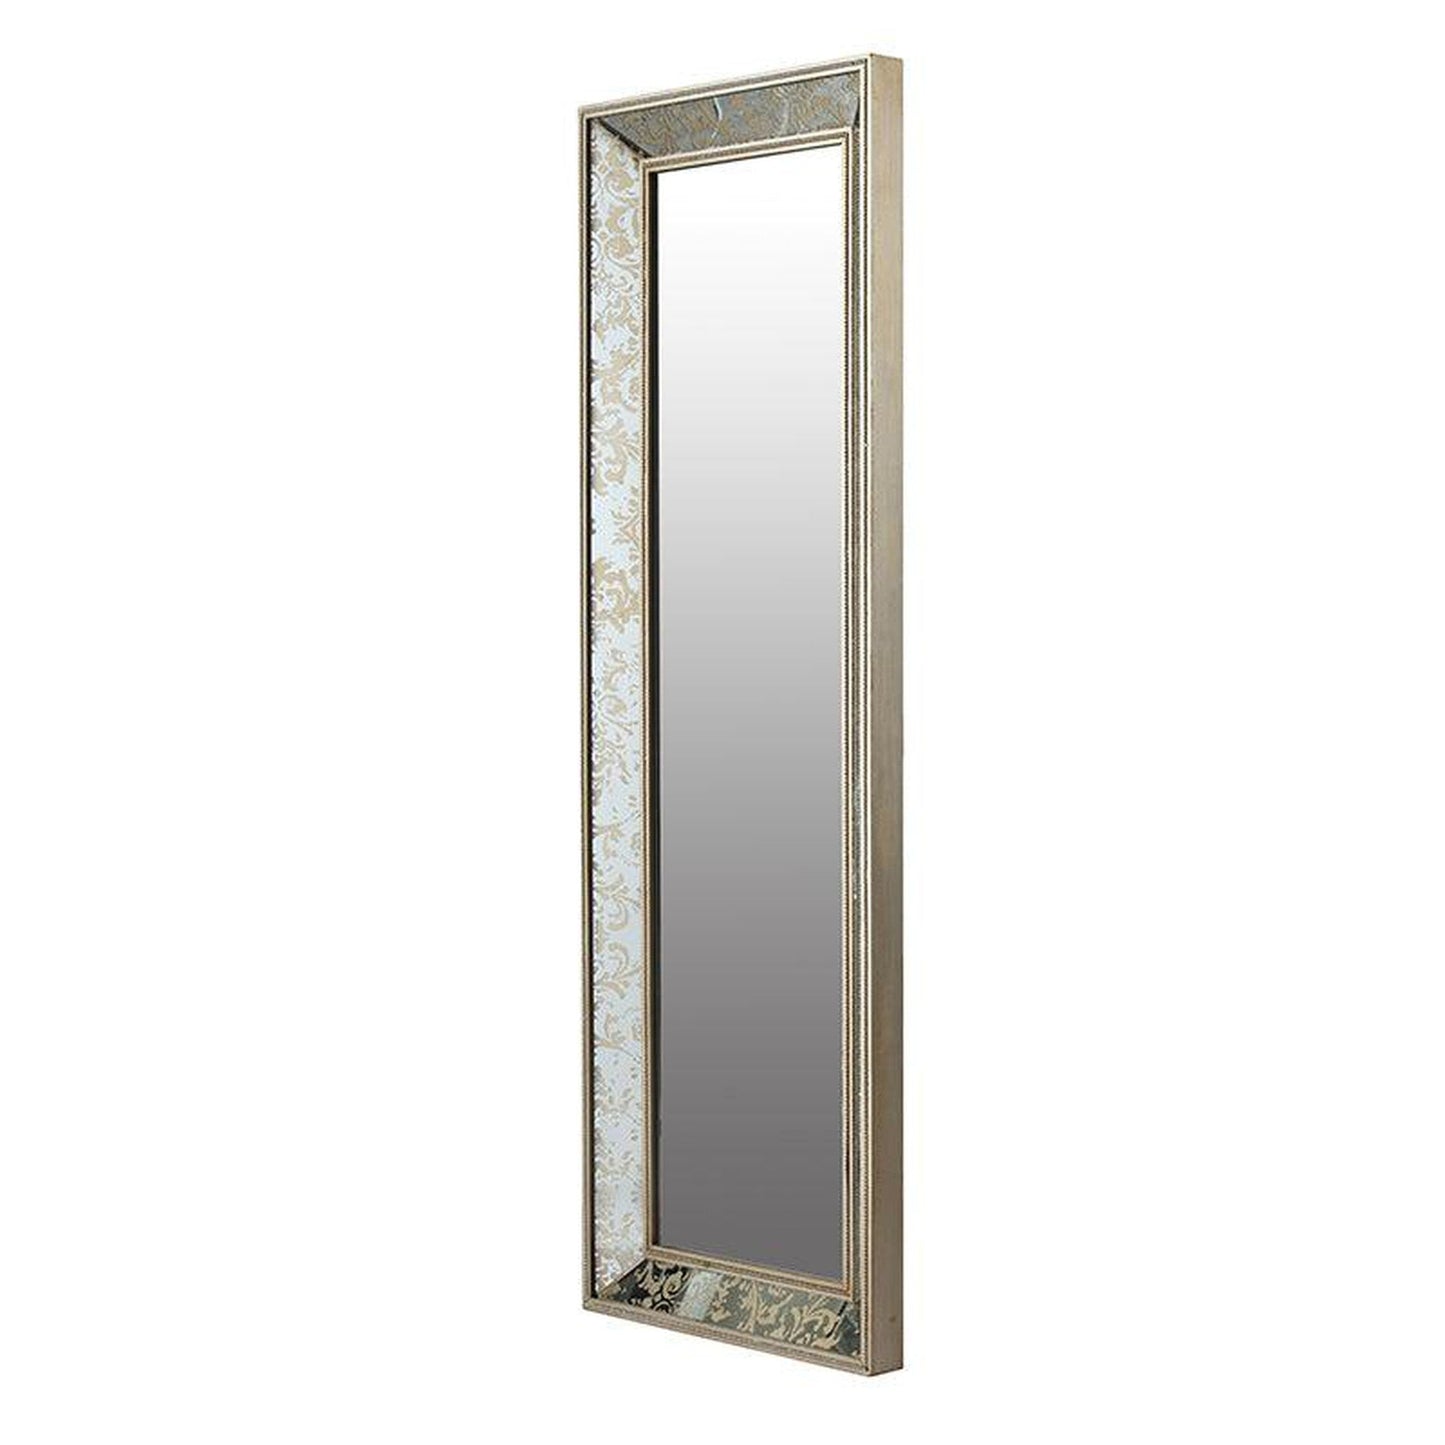 A&B Home 24" x 71" Bundle of 5 Rectangular Antique Silver and Gold With Trim Detail Wooden Framed Floor Mirror